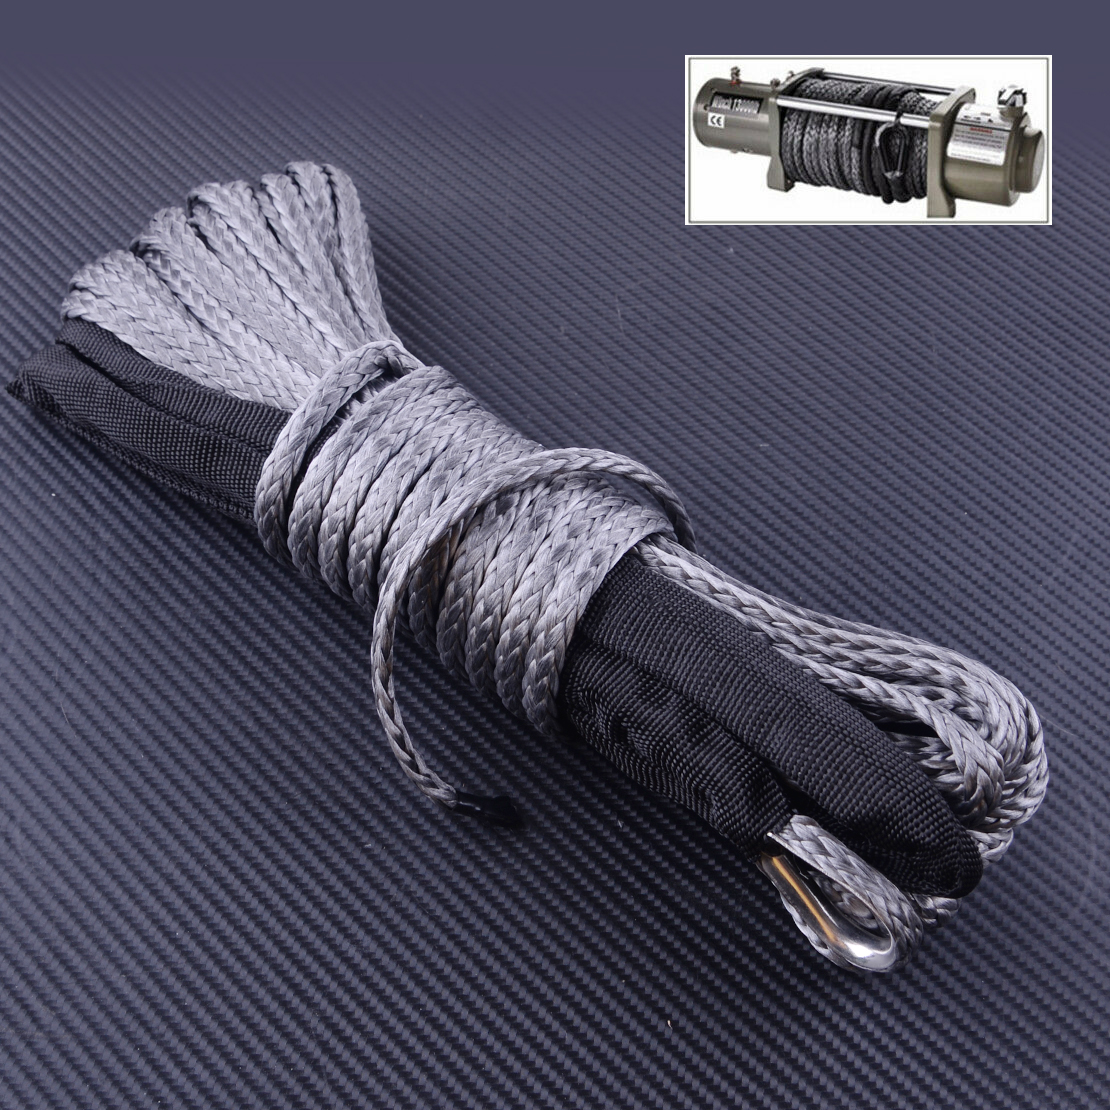 DWCX 15m (50ft) ATV Truck Winch Rope Wire Line Haul Tow Cable Towing Ropes Synthetic Fiber with Sheath Hook 7700LBs